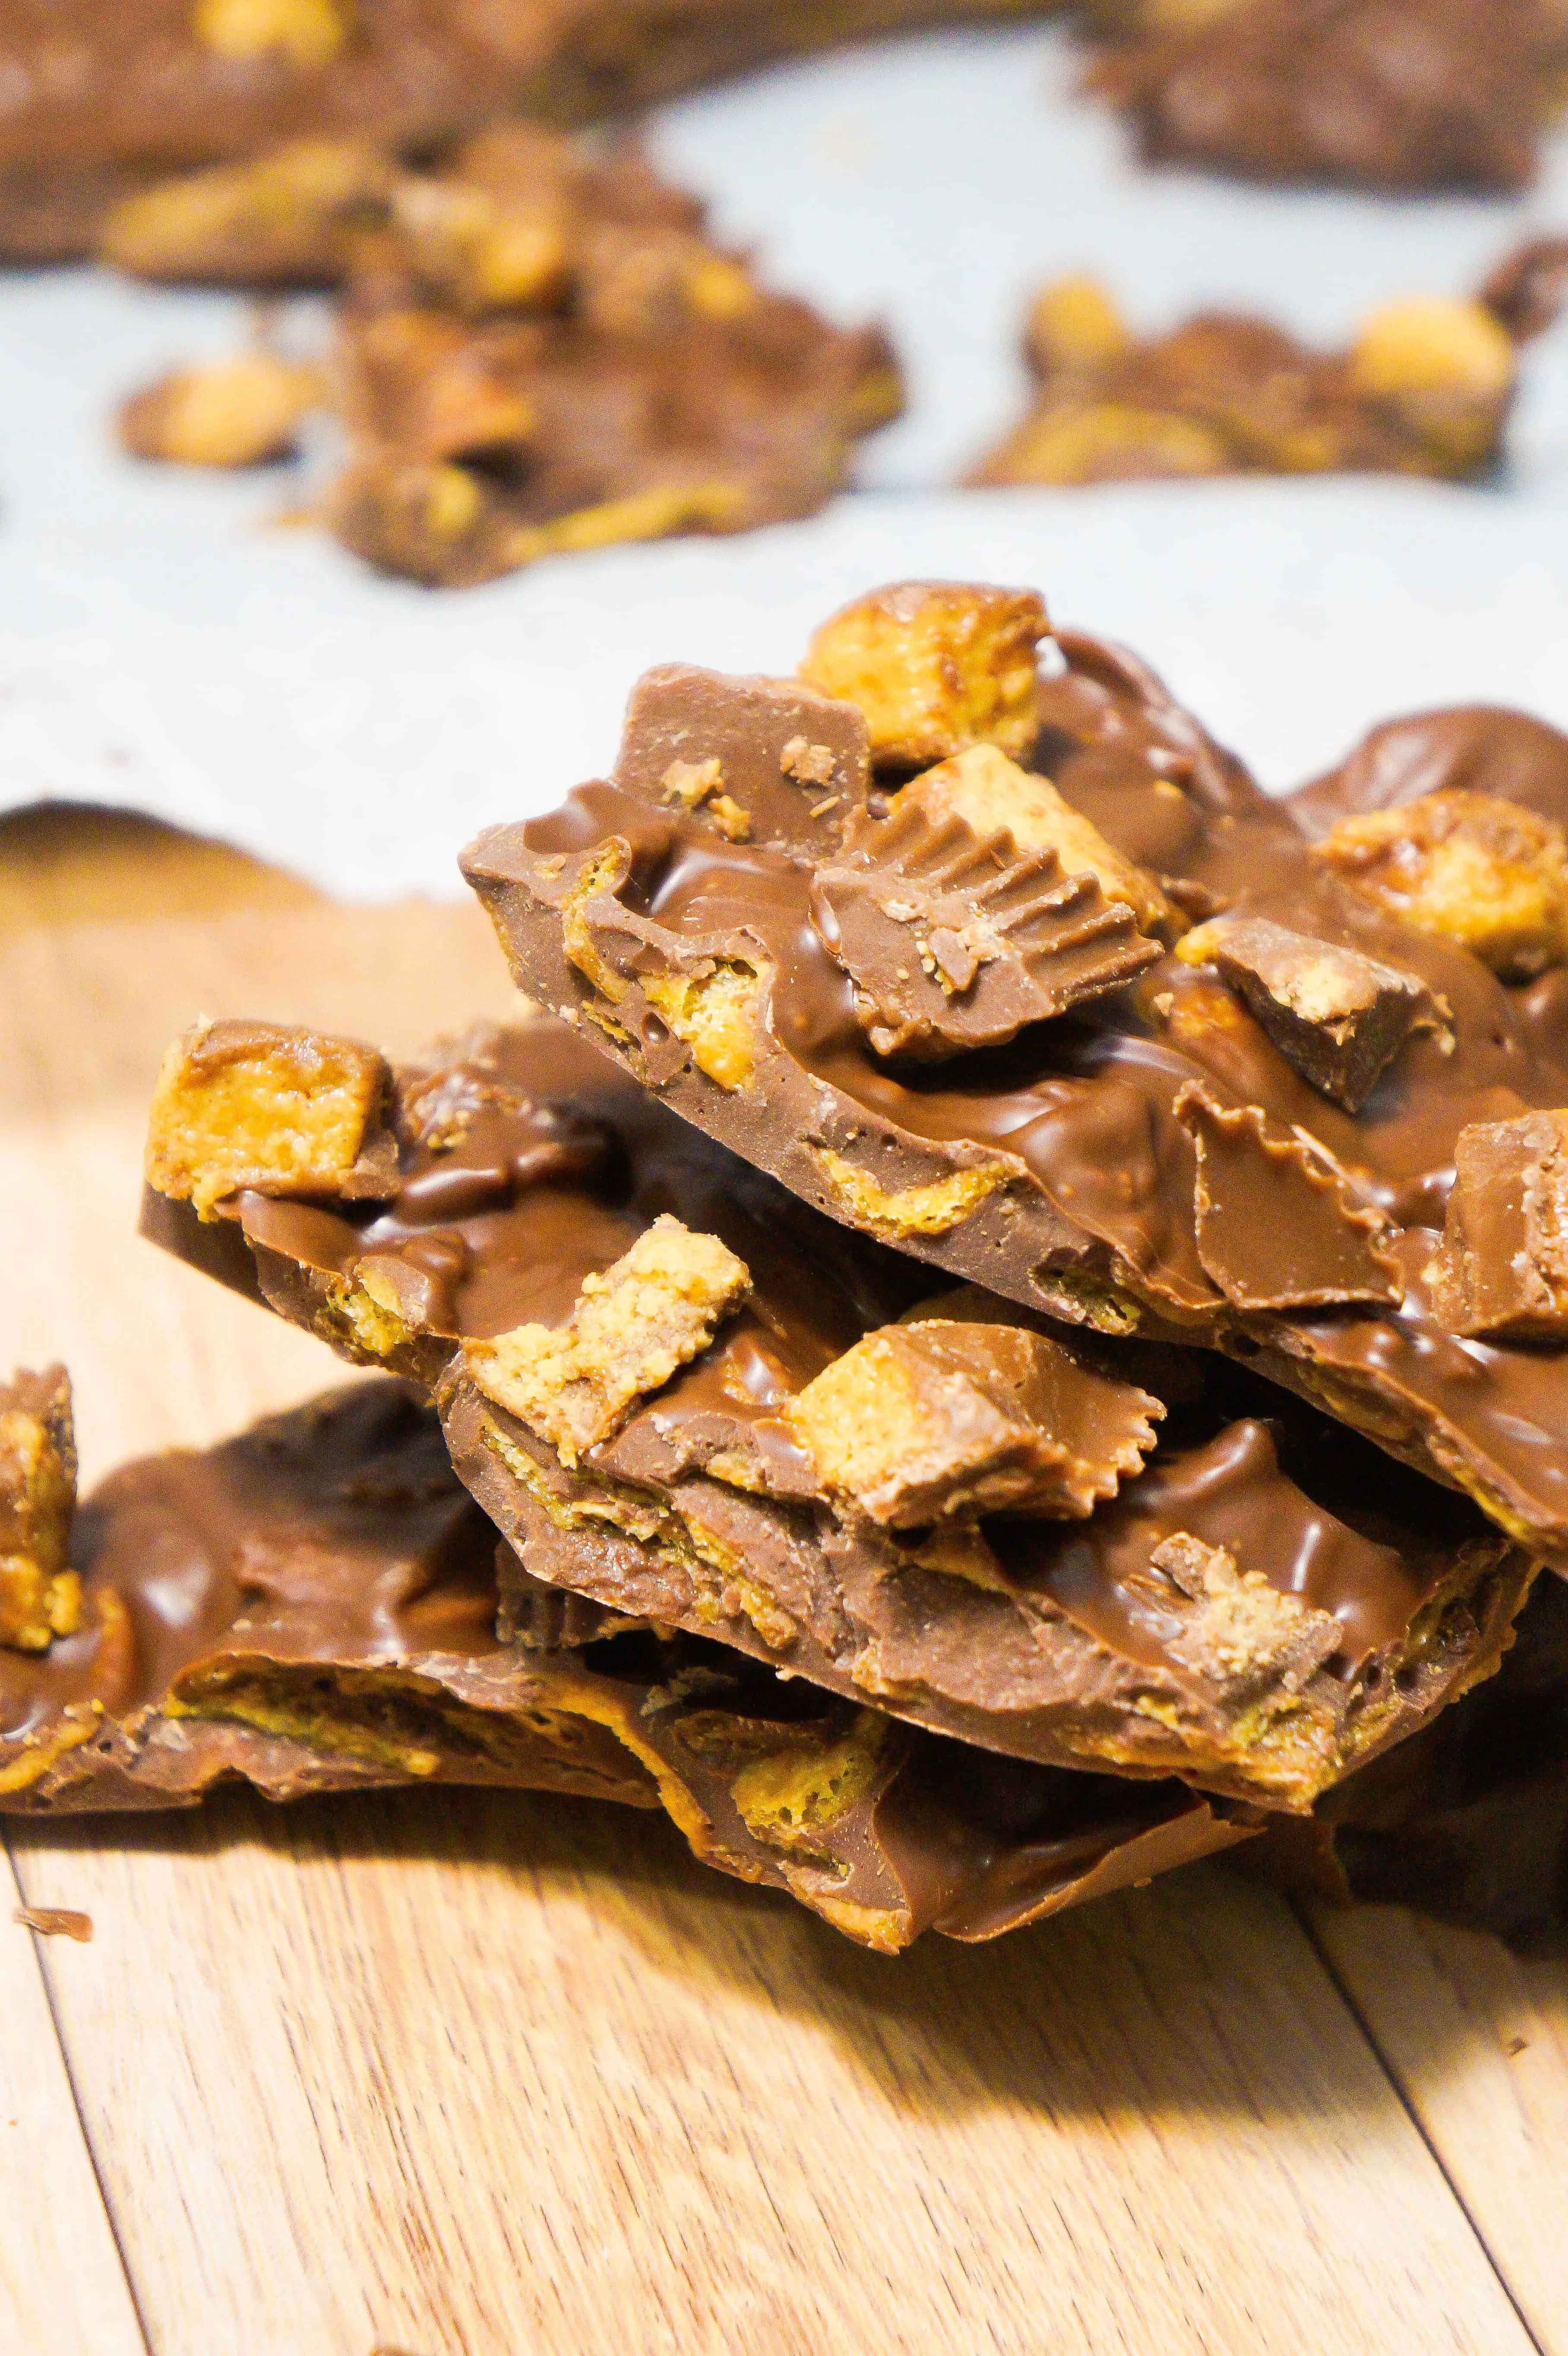 Fritos Peanut Butter Cup Bark is an easy chocolate bark recipe that combines salty and sweet.